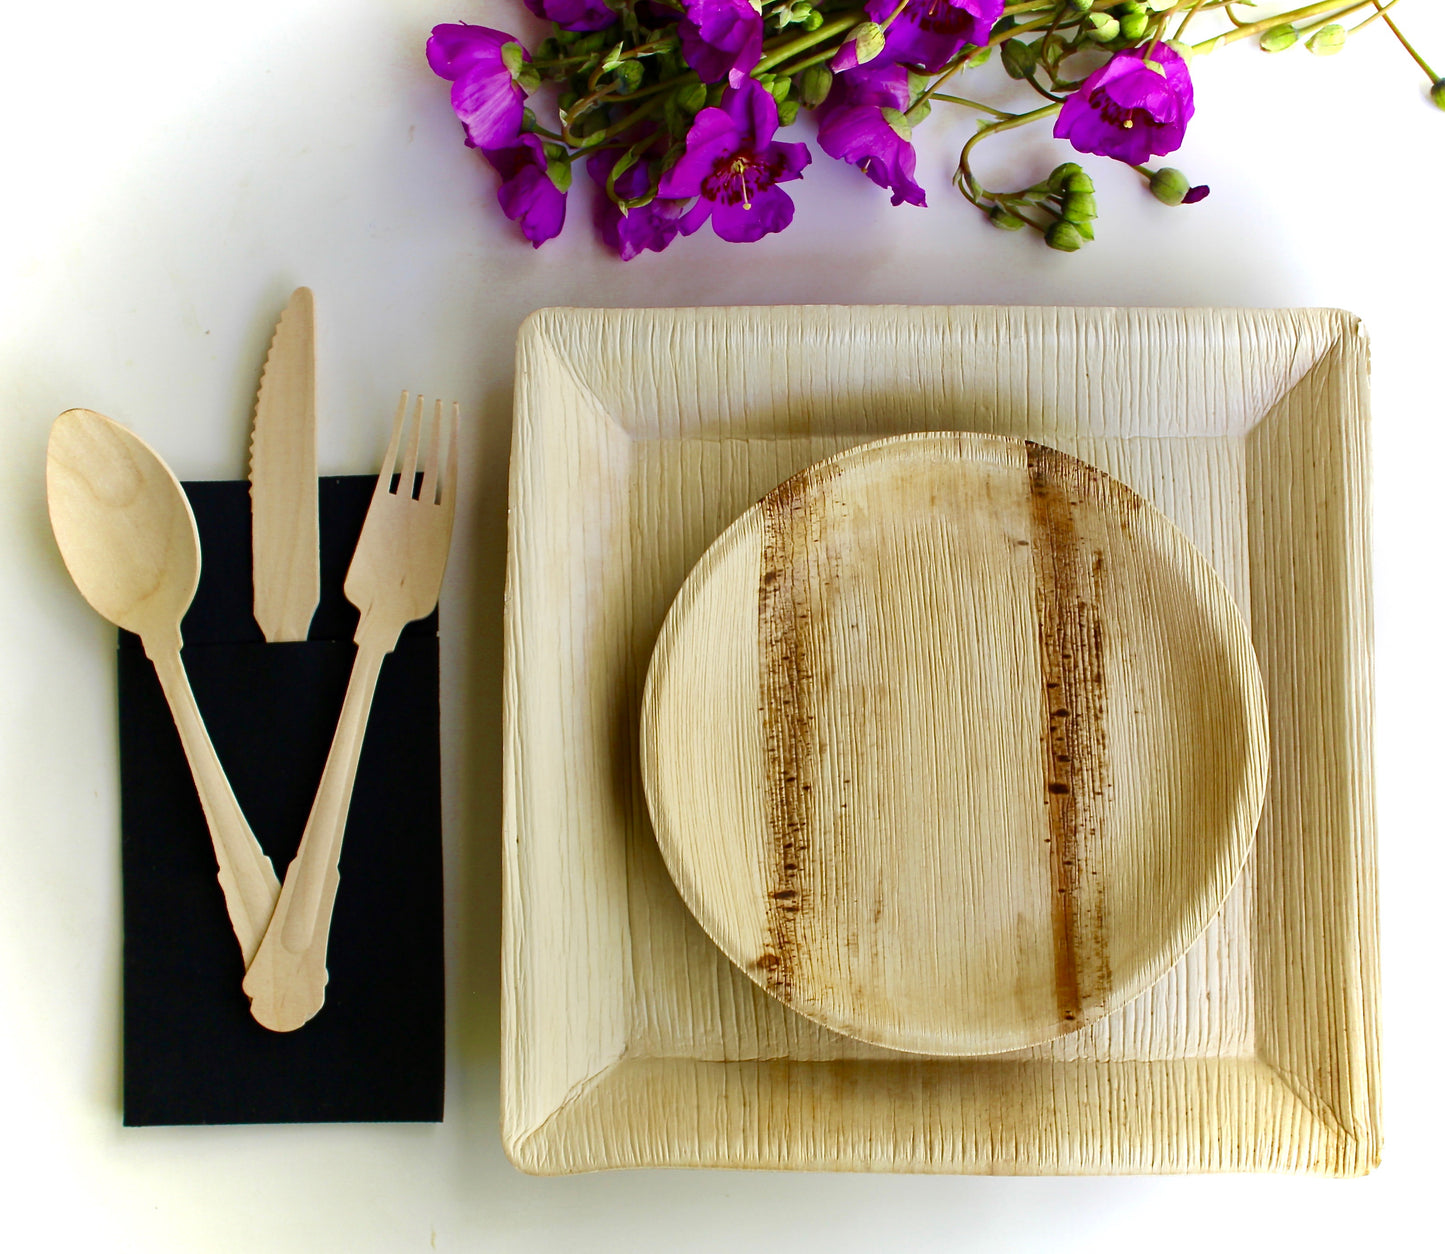 palm leaf plates 10 pice 10 " Square and 10 Pic 6" square Bowl and 30 pic cutlery and 10 pic napkin   disposable and biodegrable - compostable